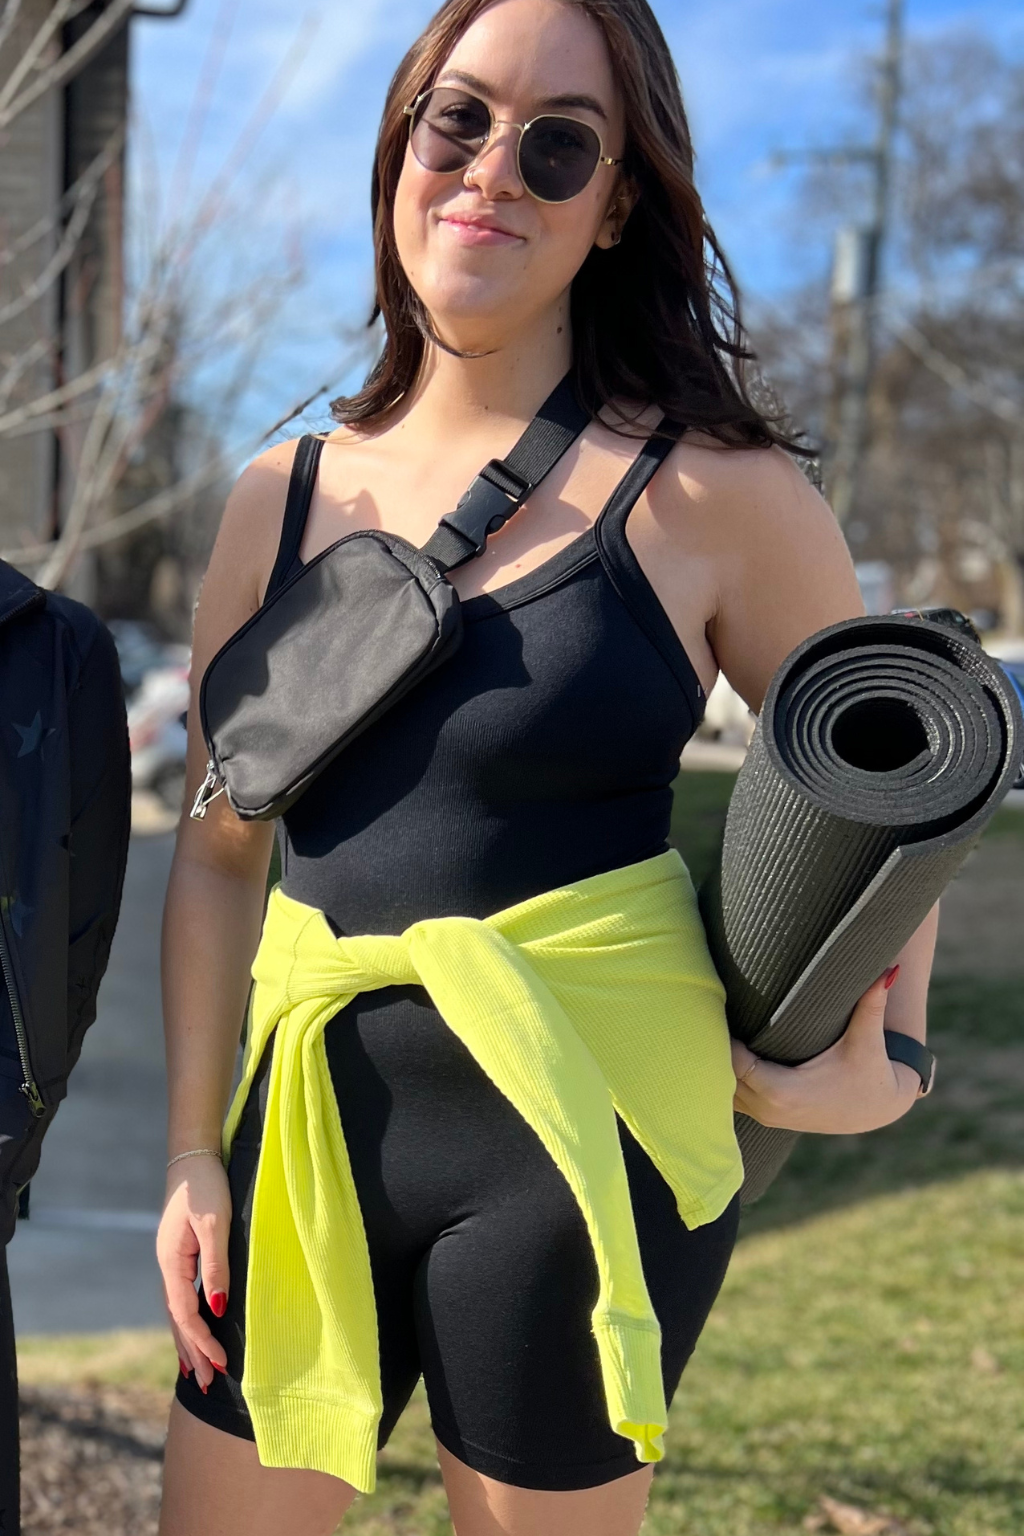 This is an absolute must for athleisure wear, on its own with a flannel or even under a cute dress for a locked and loaded feel.  This comes in handy for so many reasons, you will for sure want to snag one up!